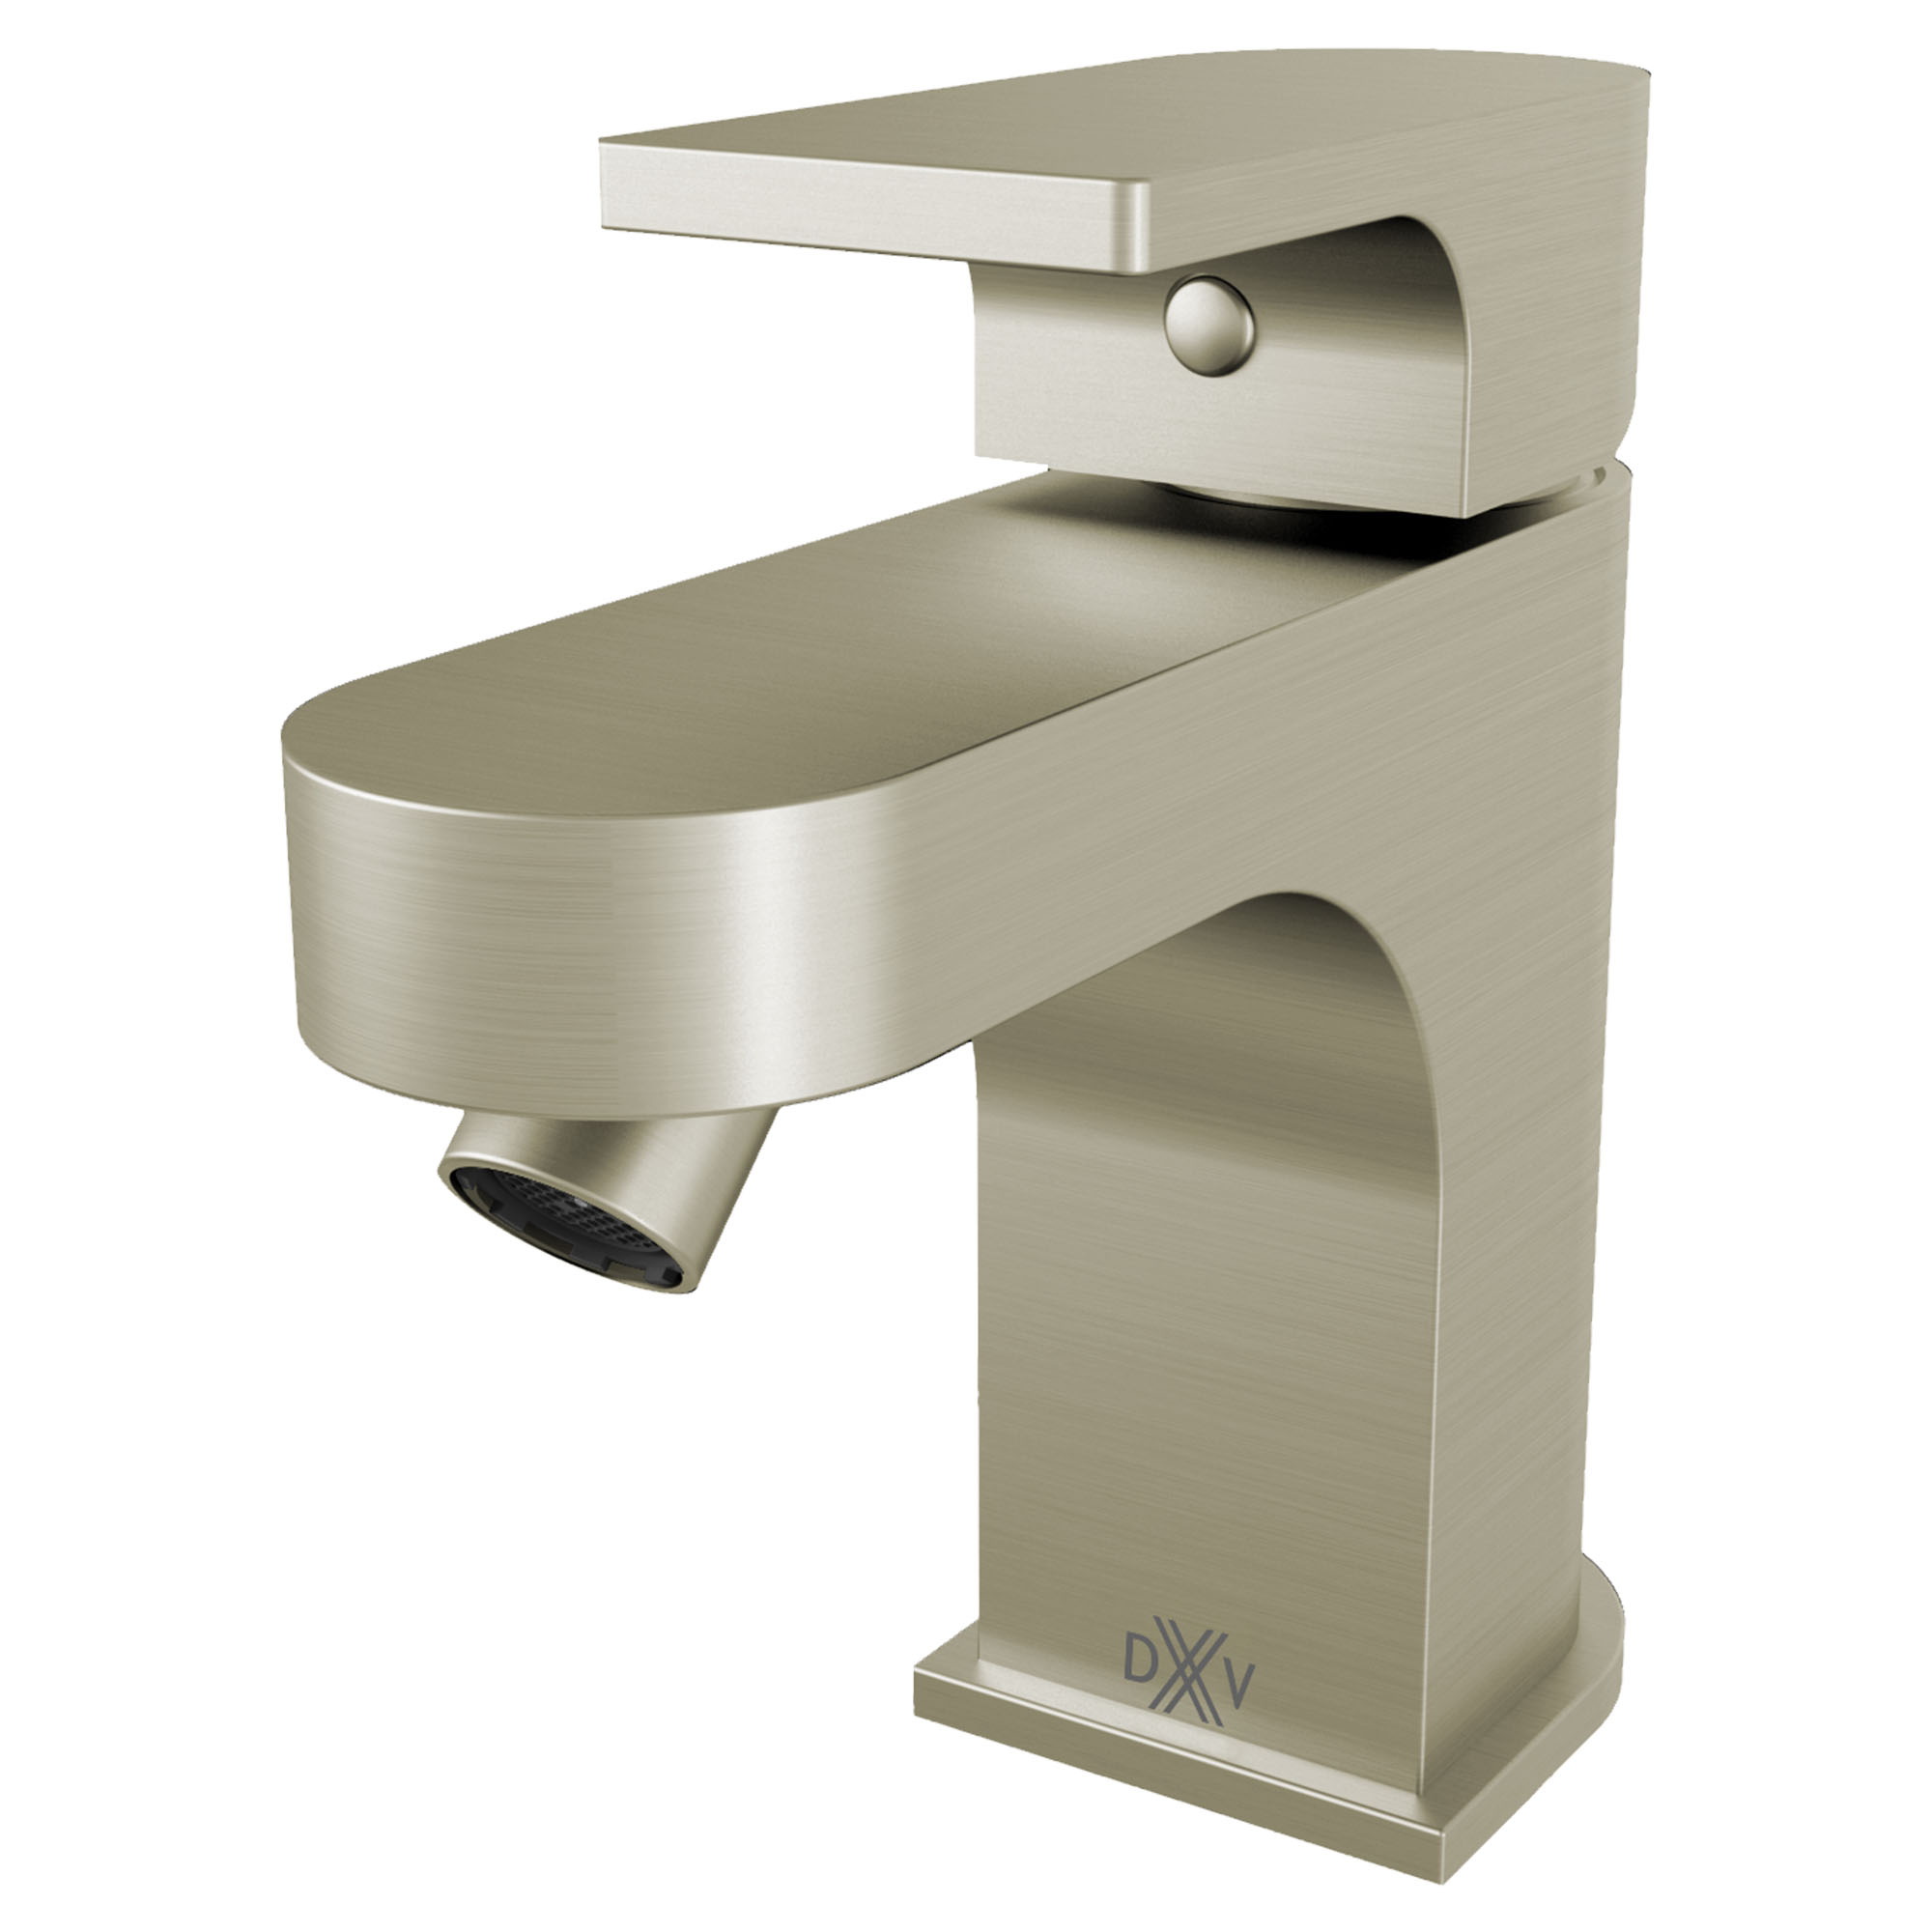 Equility® Single Hole Bidet Faucet with Lever Handle